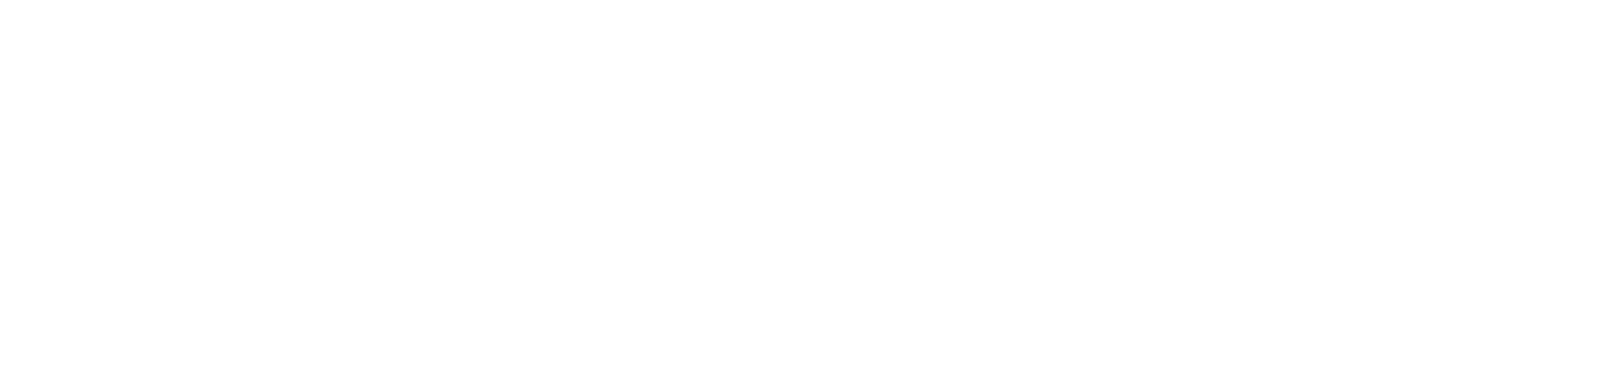 Southern Grace Builders